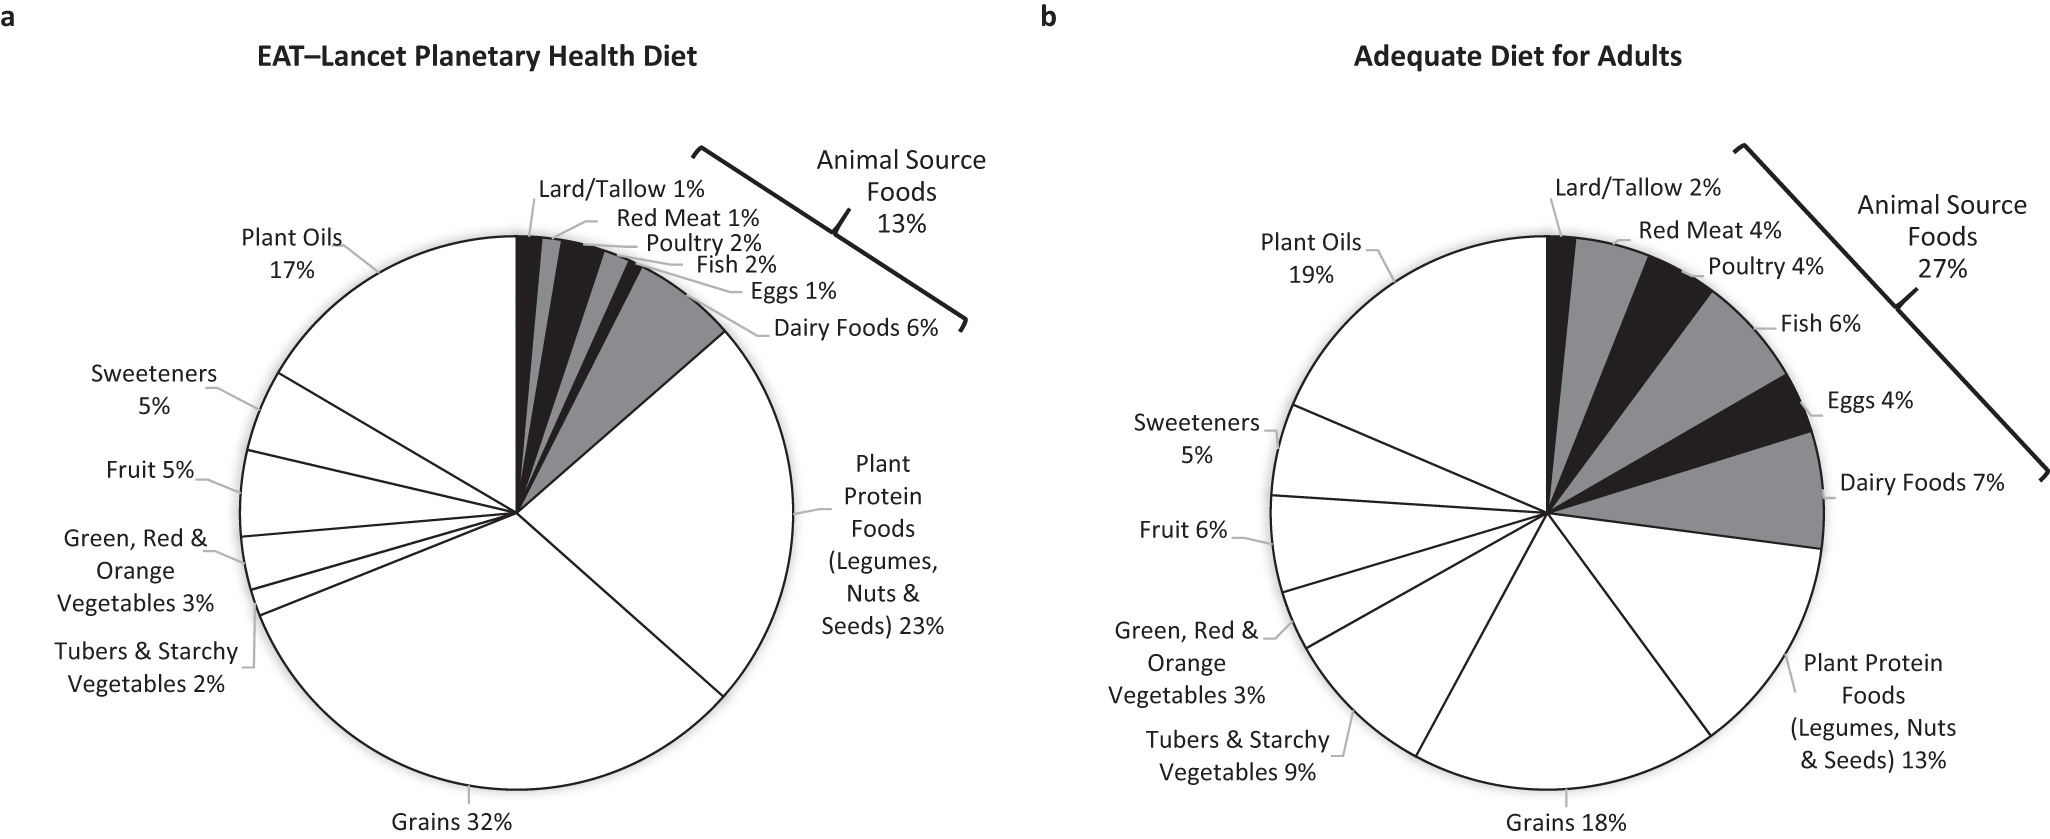 Unacceptable use of substandard metrics in policy decisions which mandate  large reductions in animal-source foods